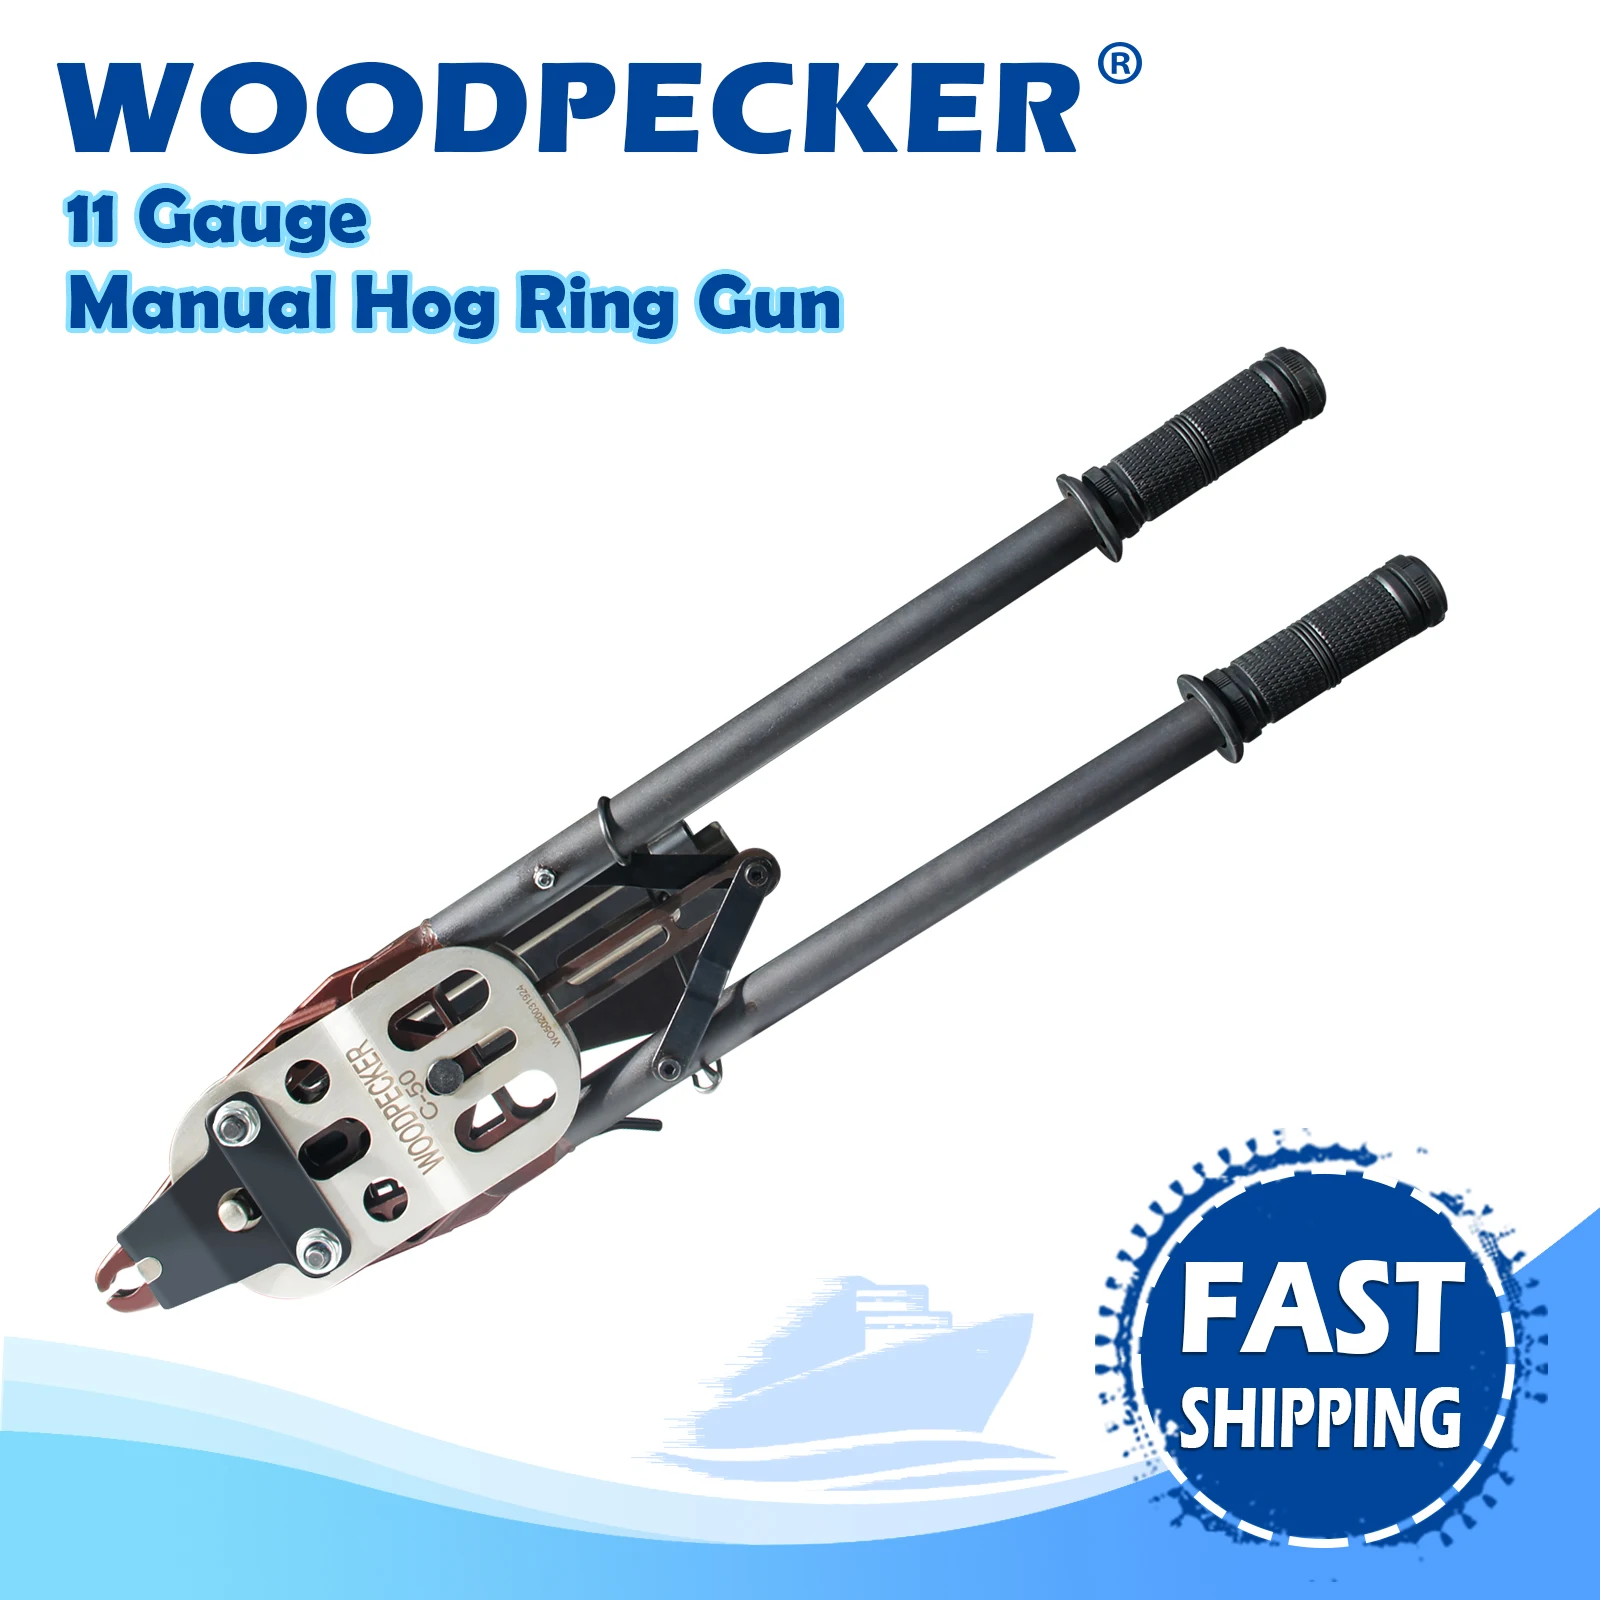 WOODPECKER C50 11 Gauge Heavy-Duty Manual Hog Ring Gun, Snap-Ring Plier with Auto-feed System, 45mm Crown for Wire Cages,Fencing for lightweight manual feed electric trimmers， trimmer line for stihl length 50m line square trimmer wire 2 7mm